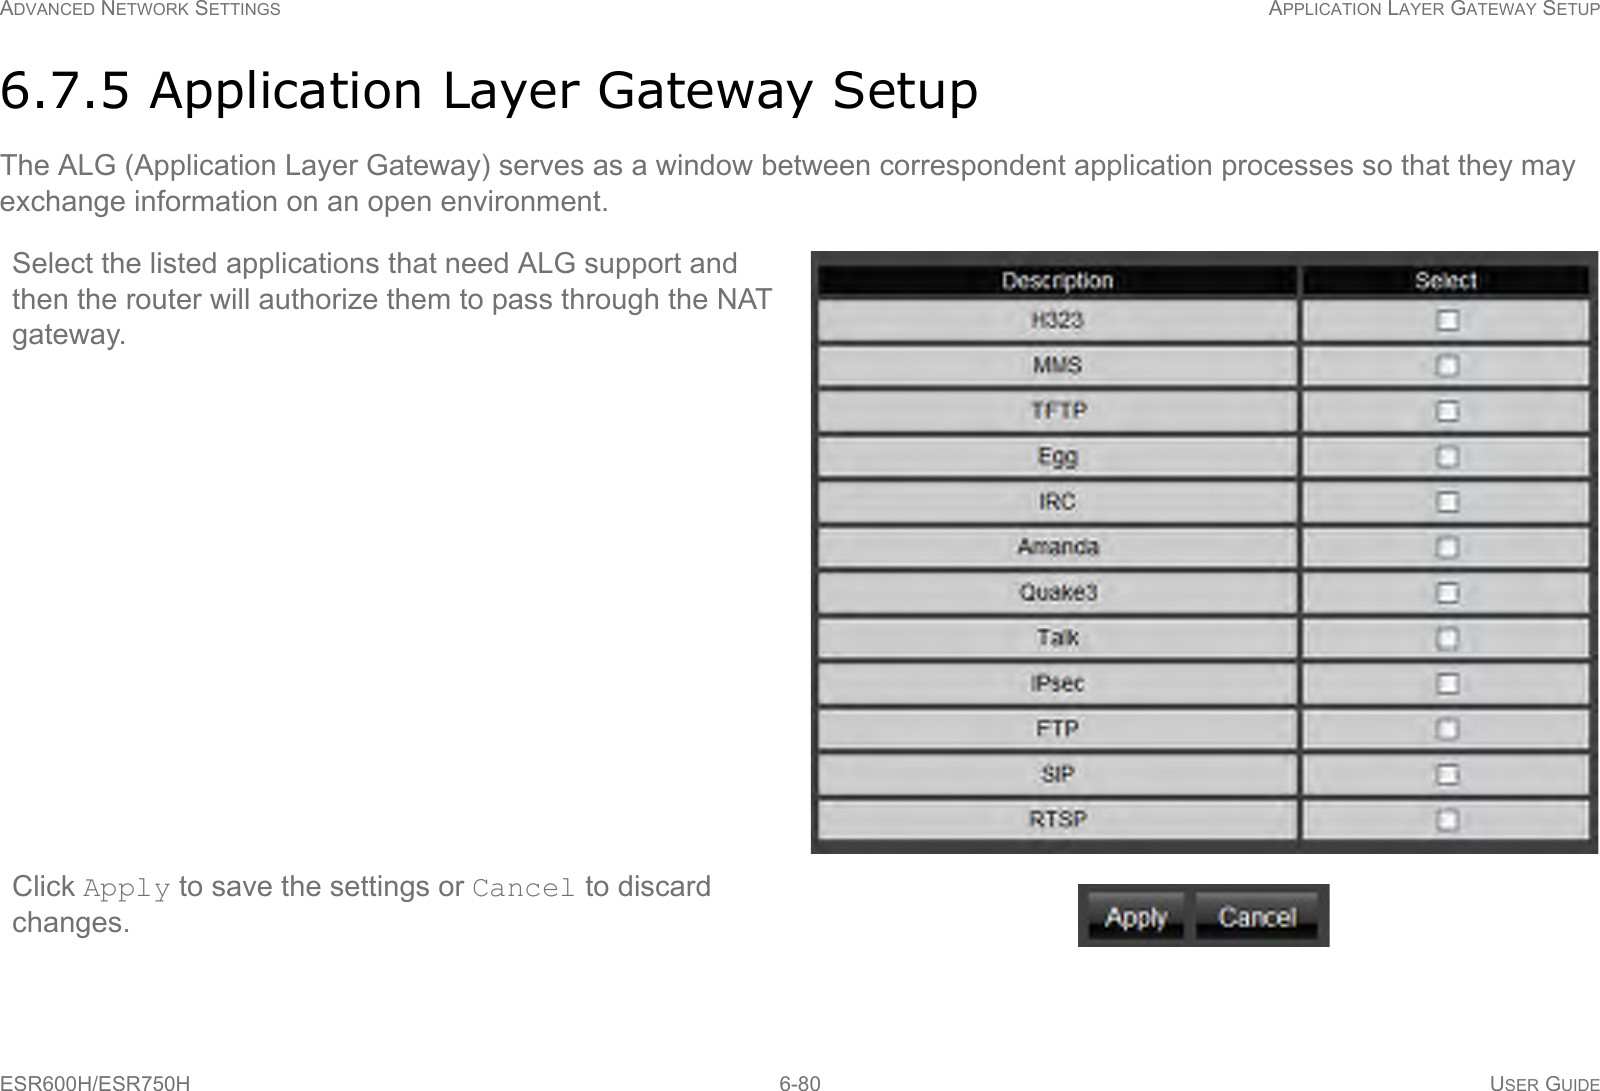 ADVANCED NETWORK SETTINGS APPLICATION LAYER GATEWAY SETUPESR600H/ESR750H 6-80 USER GUIDE6.7.5 Application Layer Gateway SetupThe ALG (Application Layer Gateway) serves as a window between correspondent application processes so that they may exchange information on an open environment.Select the listed applications that need ALG support and then the router will authorize them to pass through the NAT gateway.Click Apply to save the settings or Cancel to discard changes.